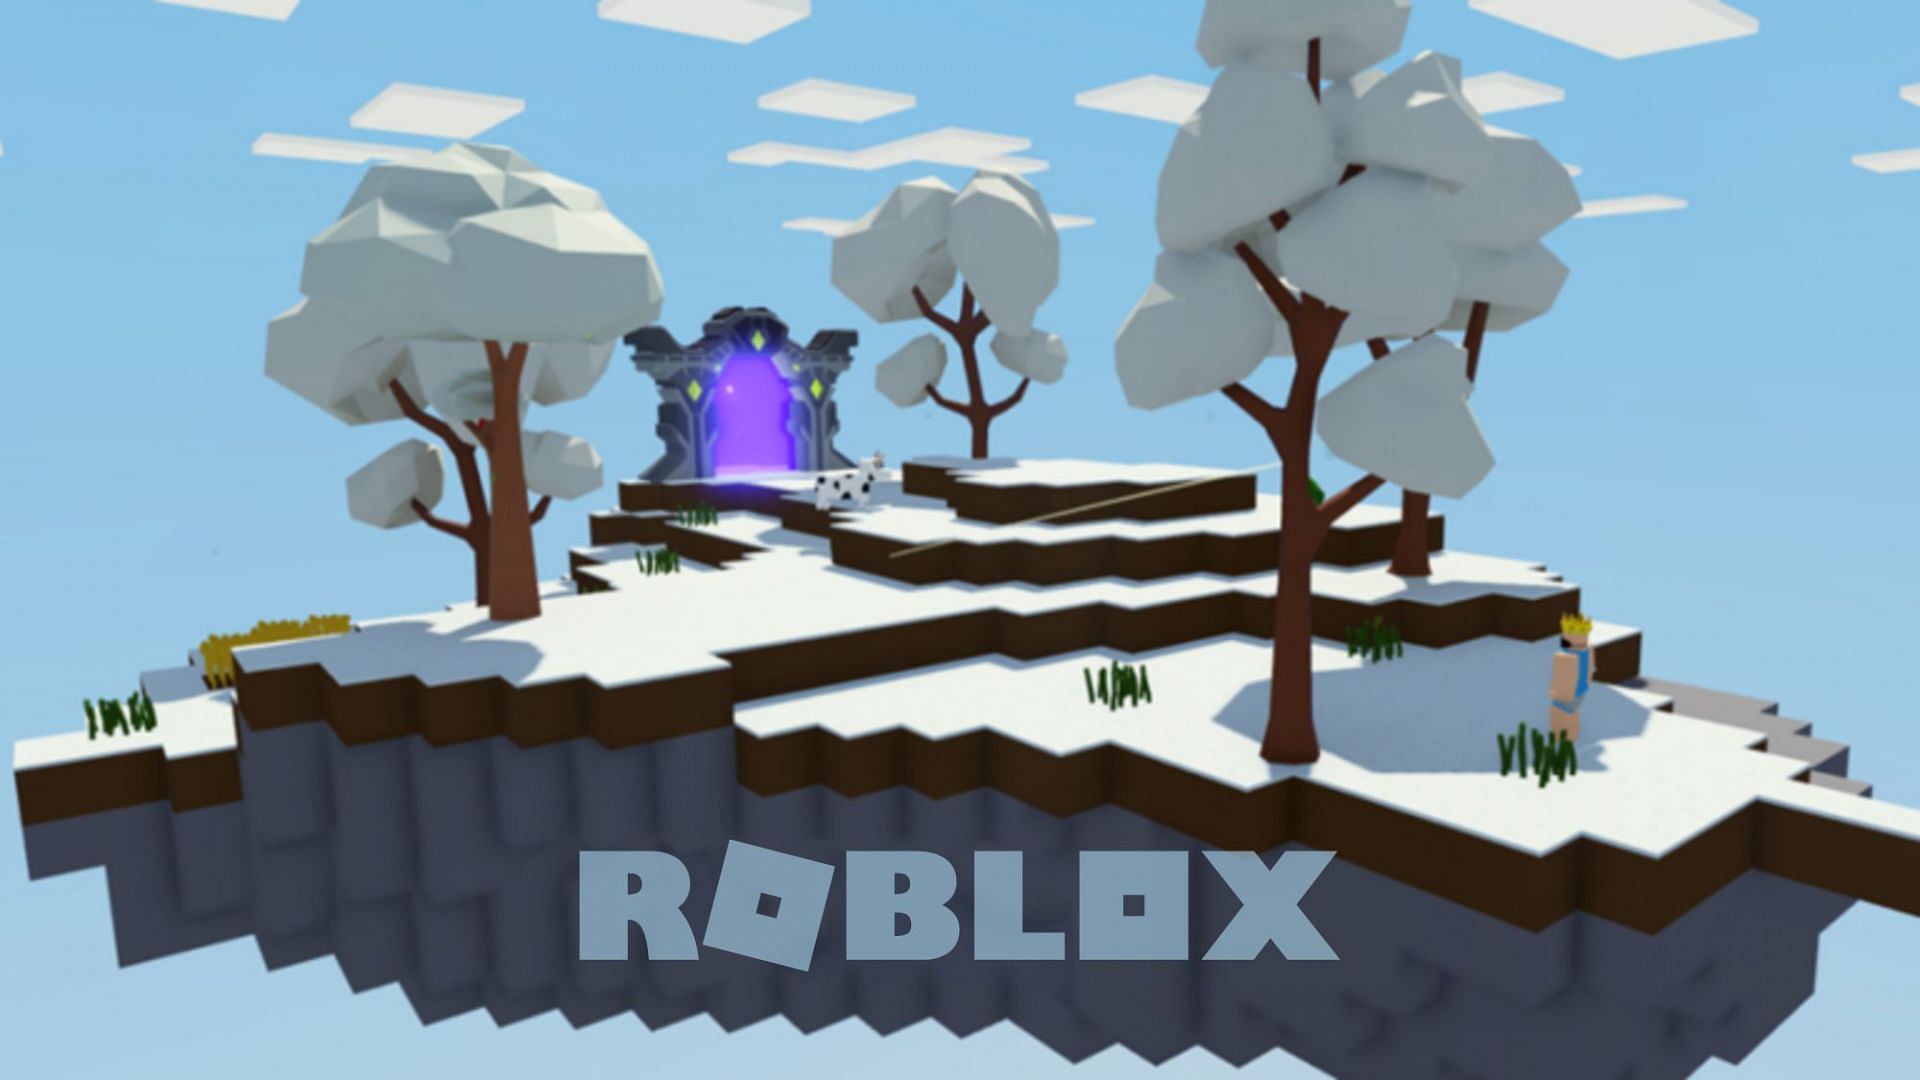 Let your creativity flow with these sandbox games in Roblox (Image via Roblox)